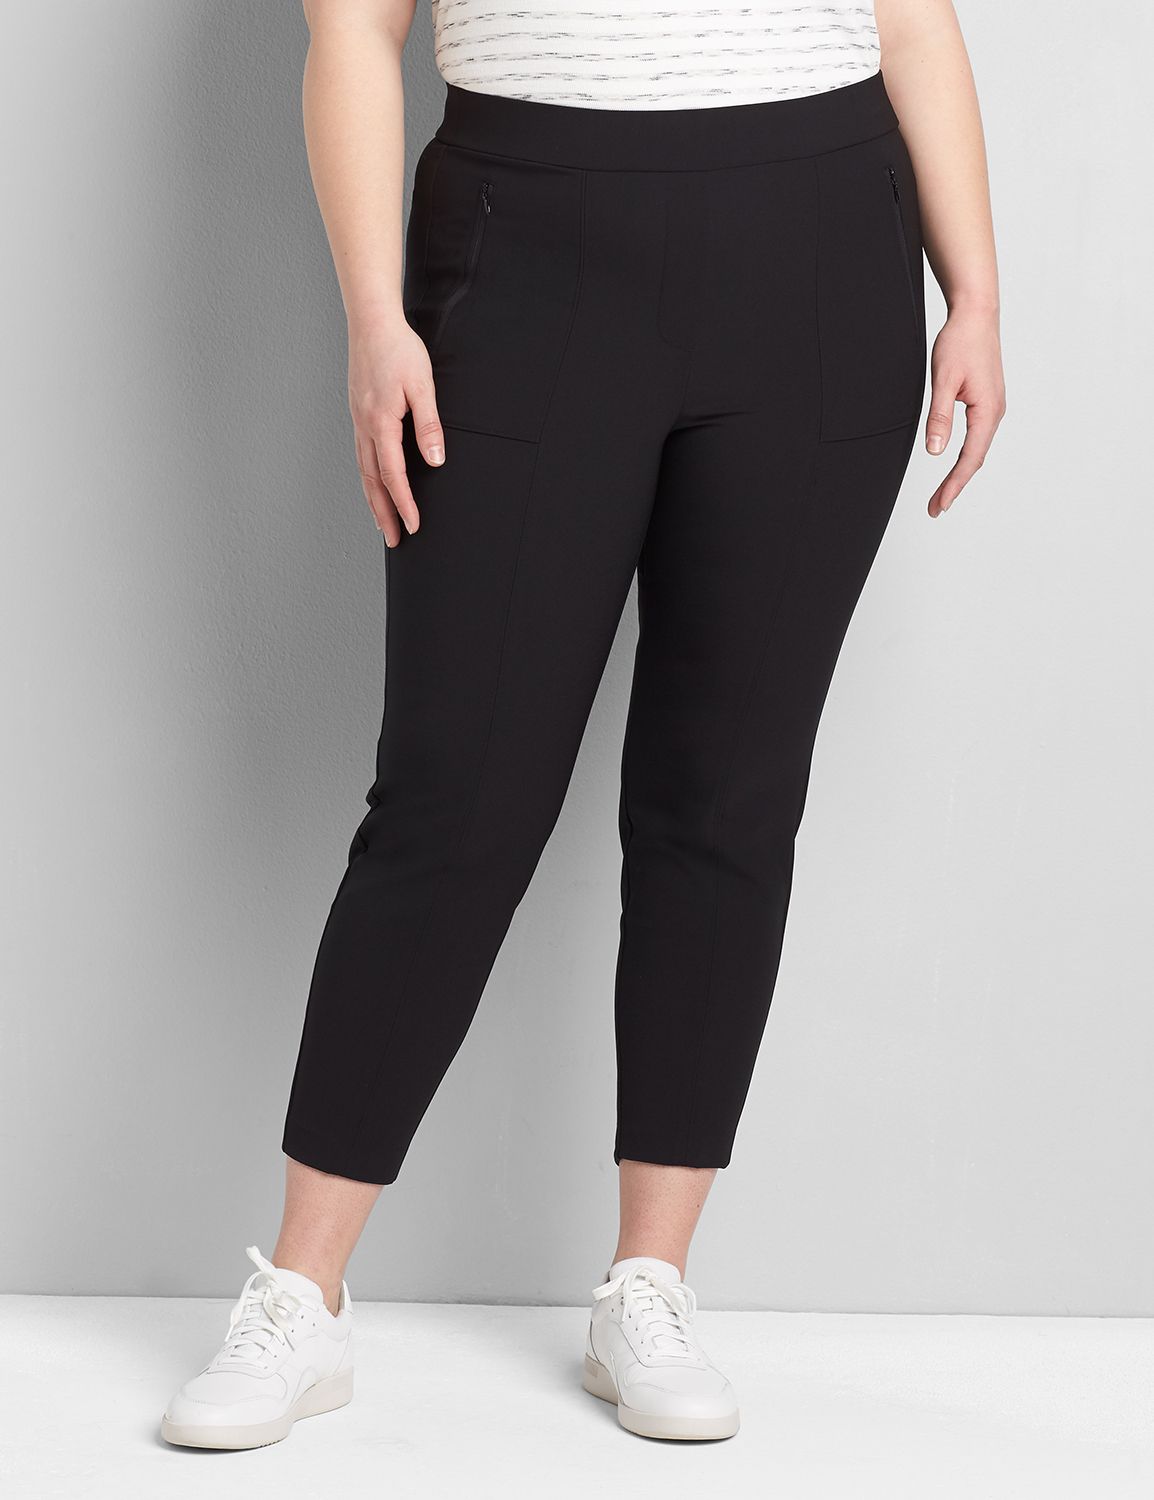 The Perfect Black Pants, Ankle 4-Pocket by Spanx Online